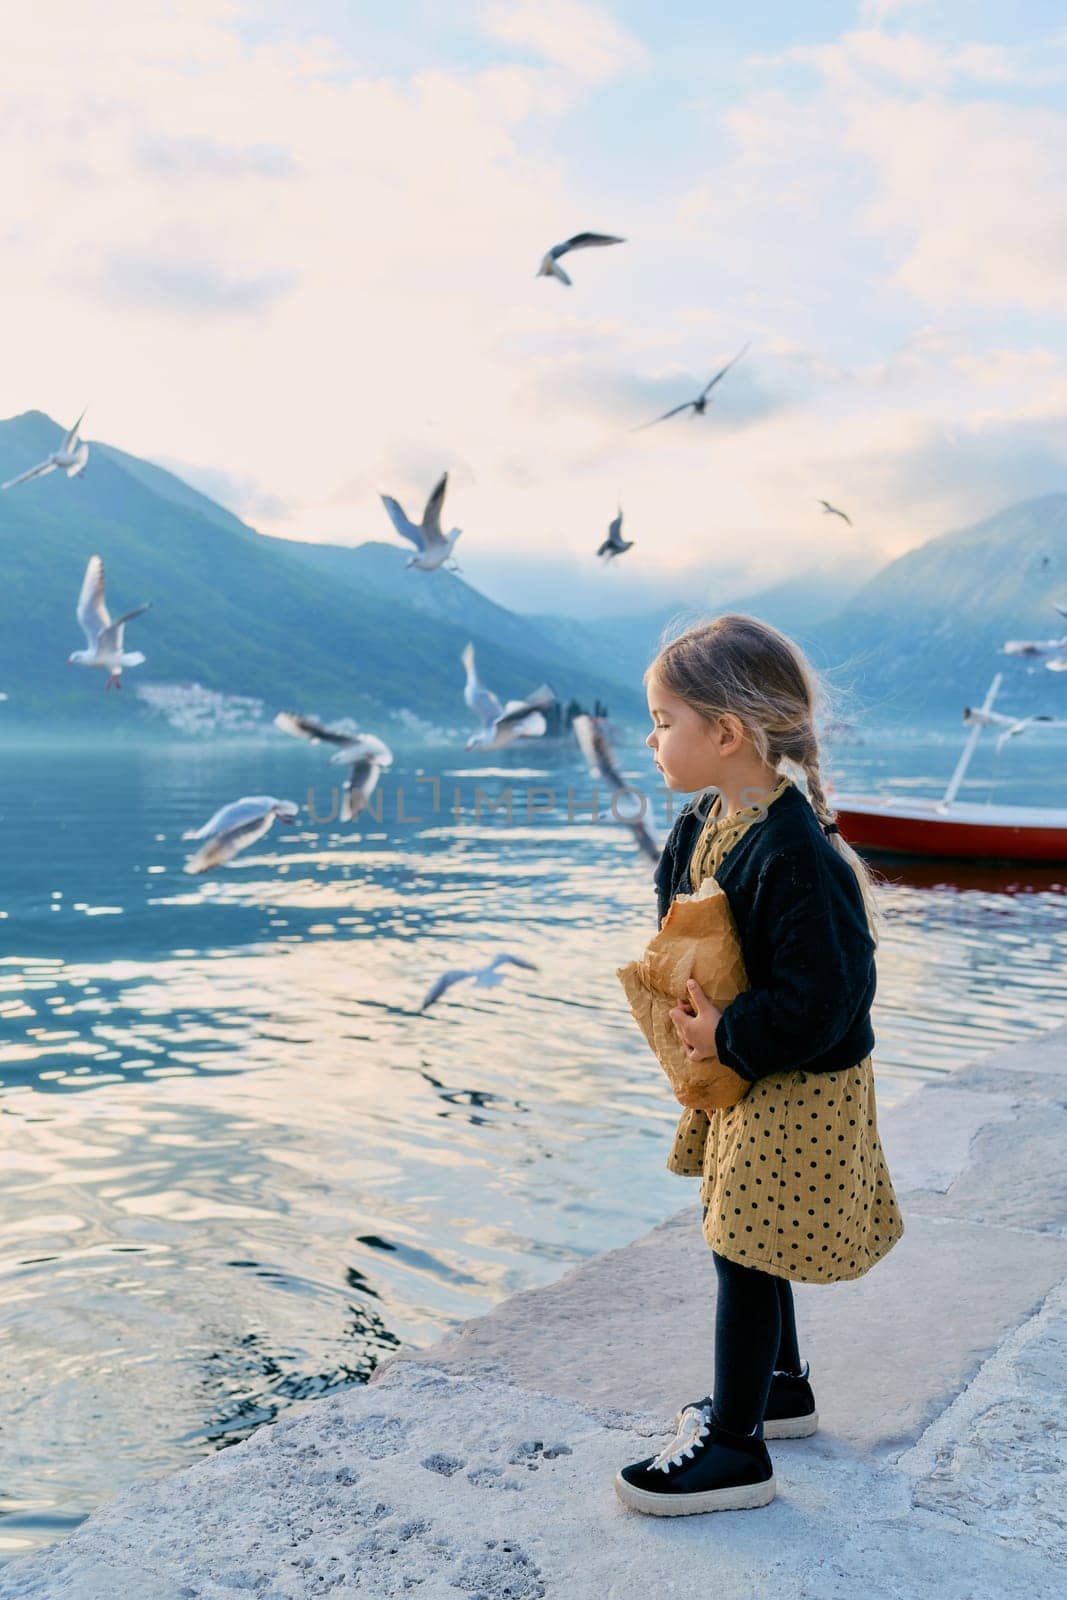 Little girl with a loaf of bread stands on the pier and looks at the flying seagulls. High quality photo